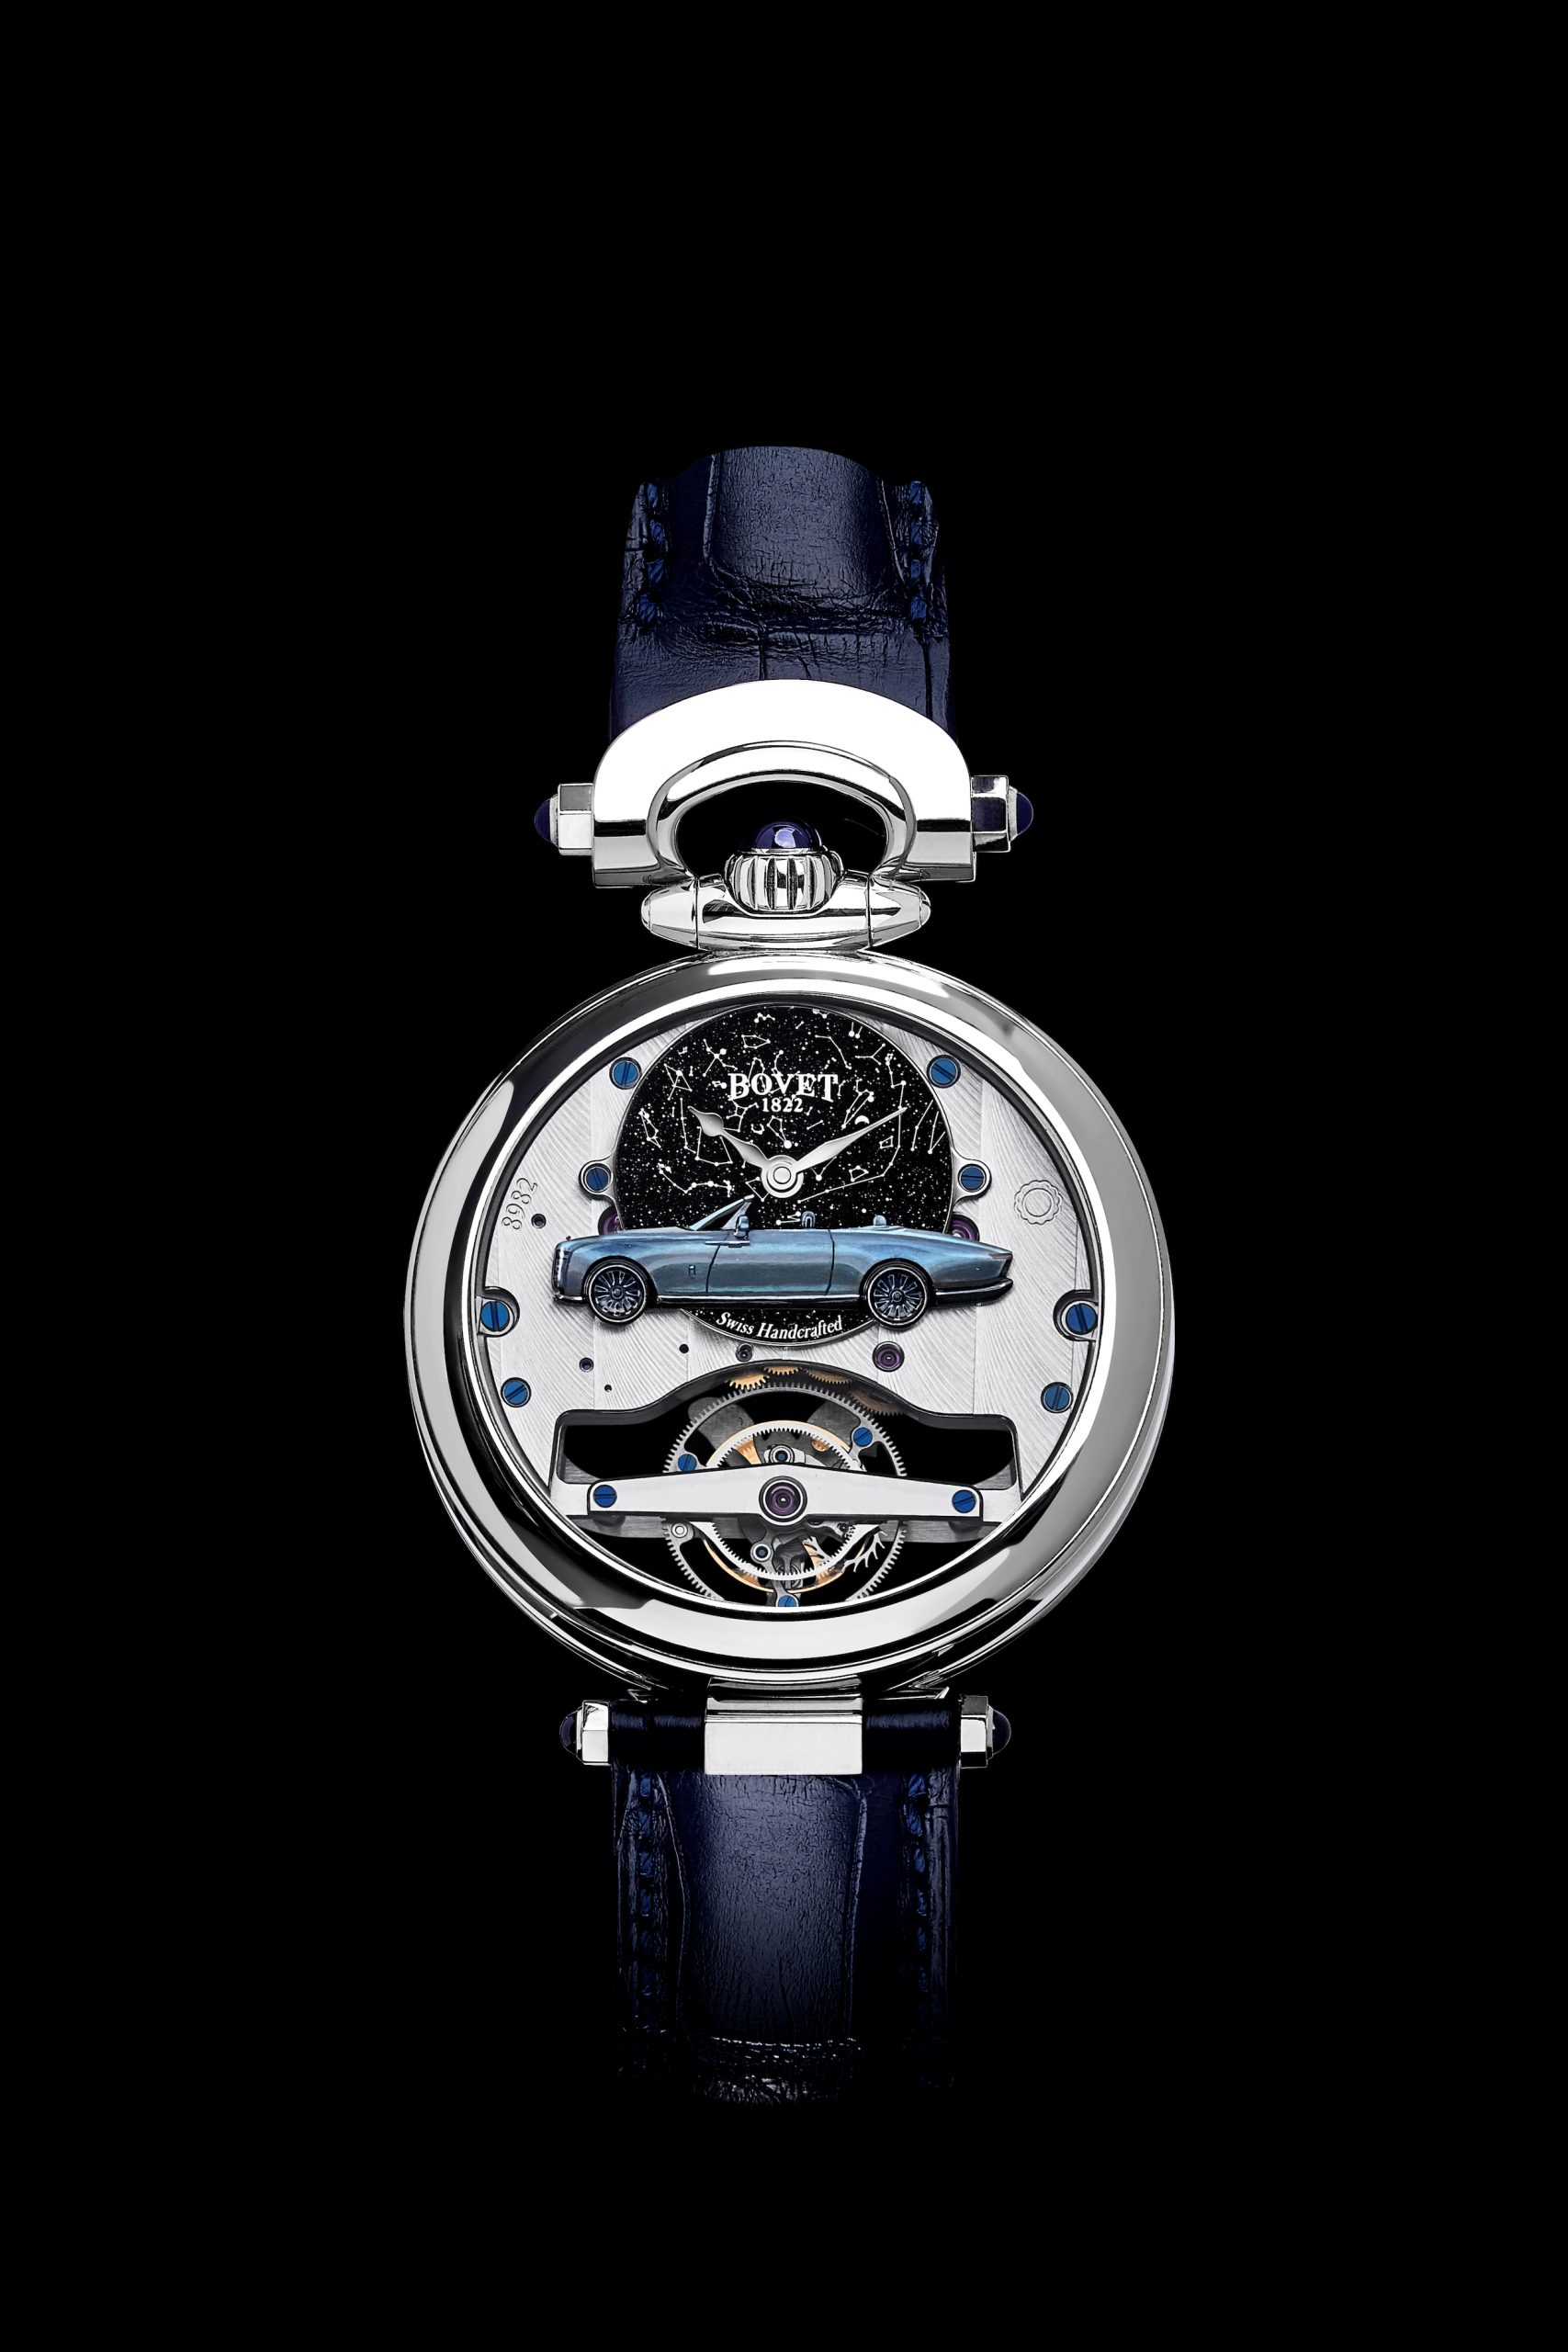 Rolls Royce collaboration - the man’s edition / Photo: Bovet 1822